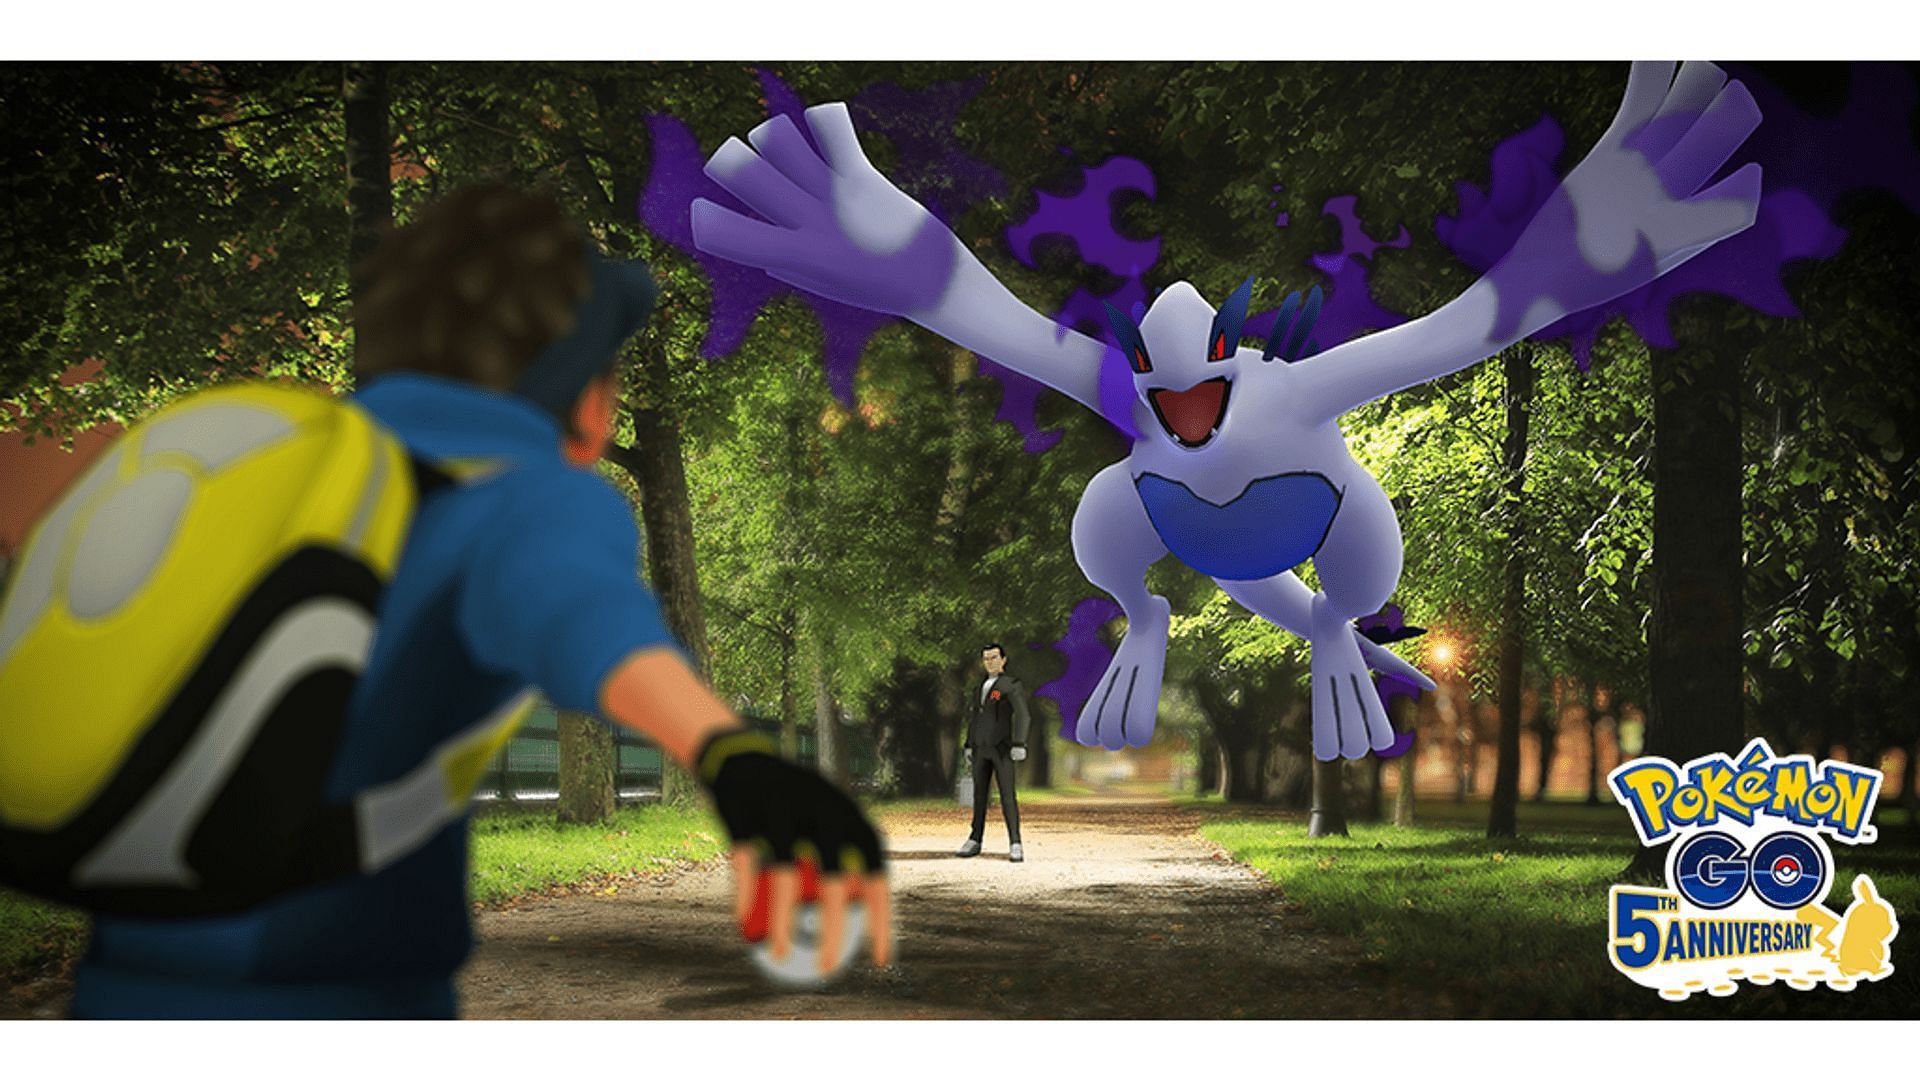 Shadow Lugia and Giovanni as they appear in Pokemon GO promotional imagery (Image via Niantic)